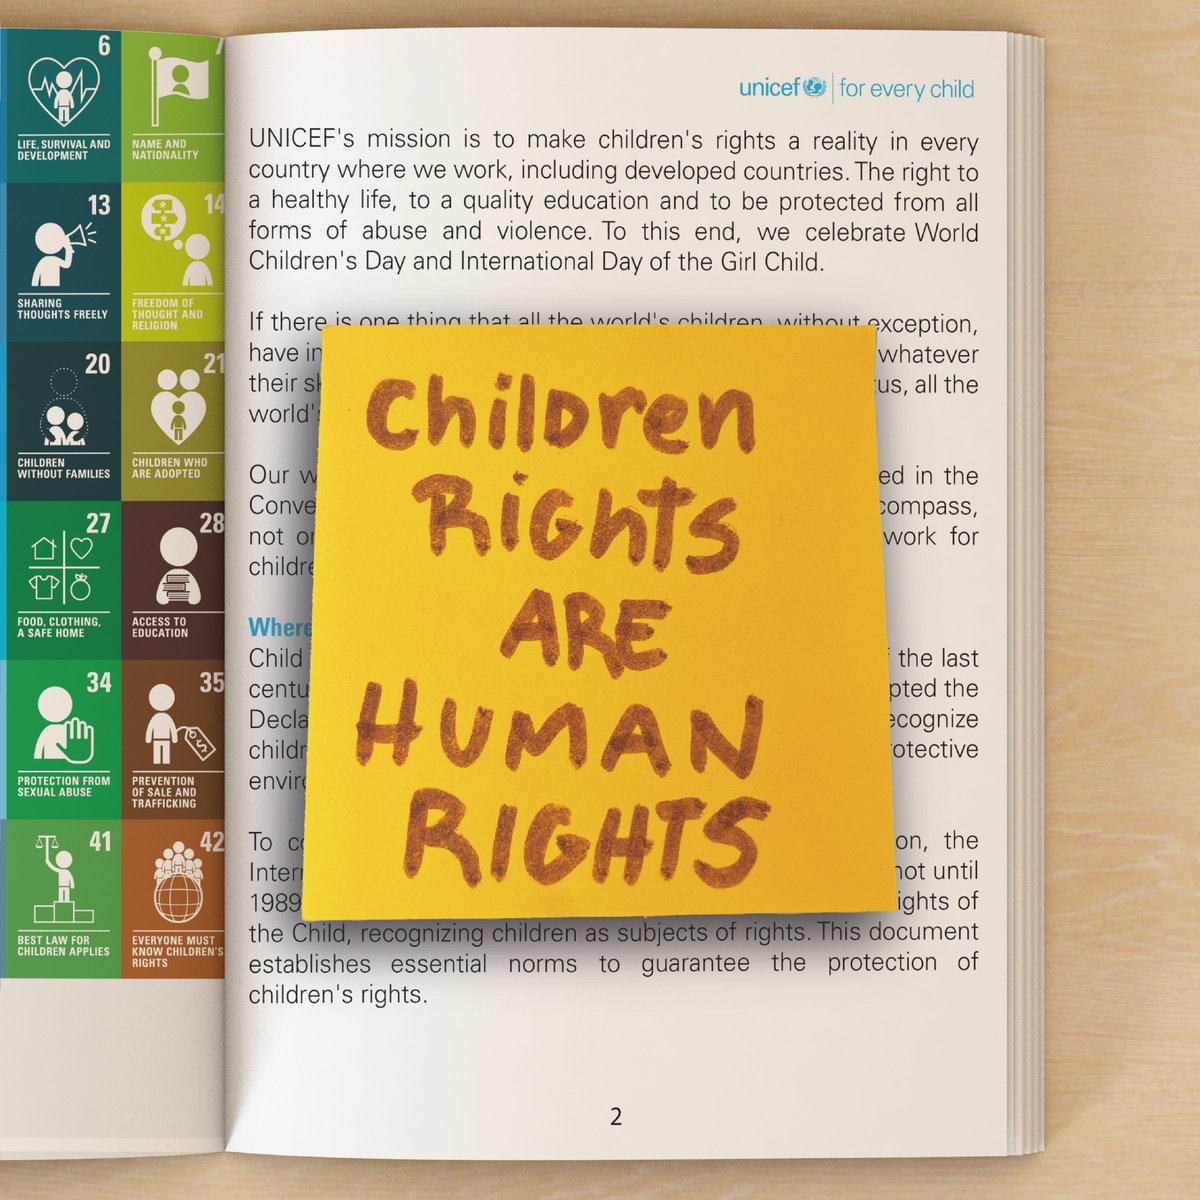 This year #UNICEF celebrates the 35th anniversary of the Convention on the Rights of the Child (CRC). 
All children and adolescents, regardless of their gender, ethnic origin, religion, disability or any other condition, have rights.
#ForEveryChild, all #rights.
#CRC35 🌟 #CDN35